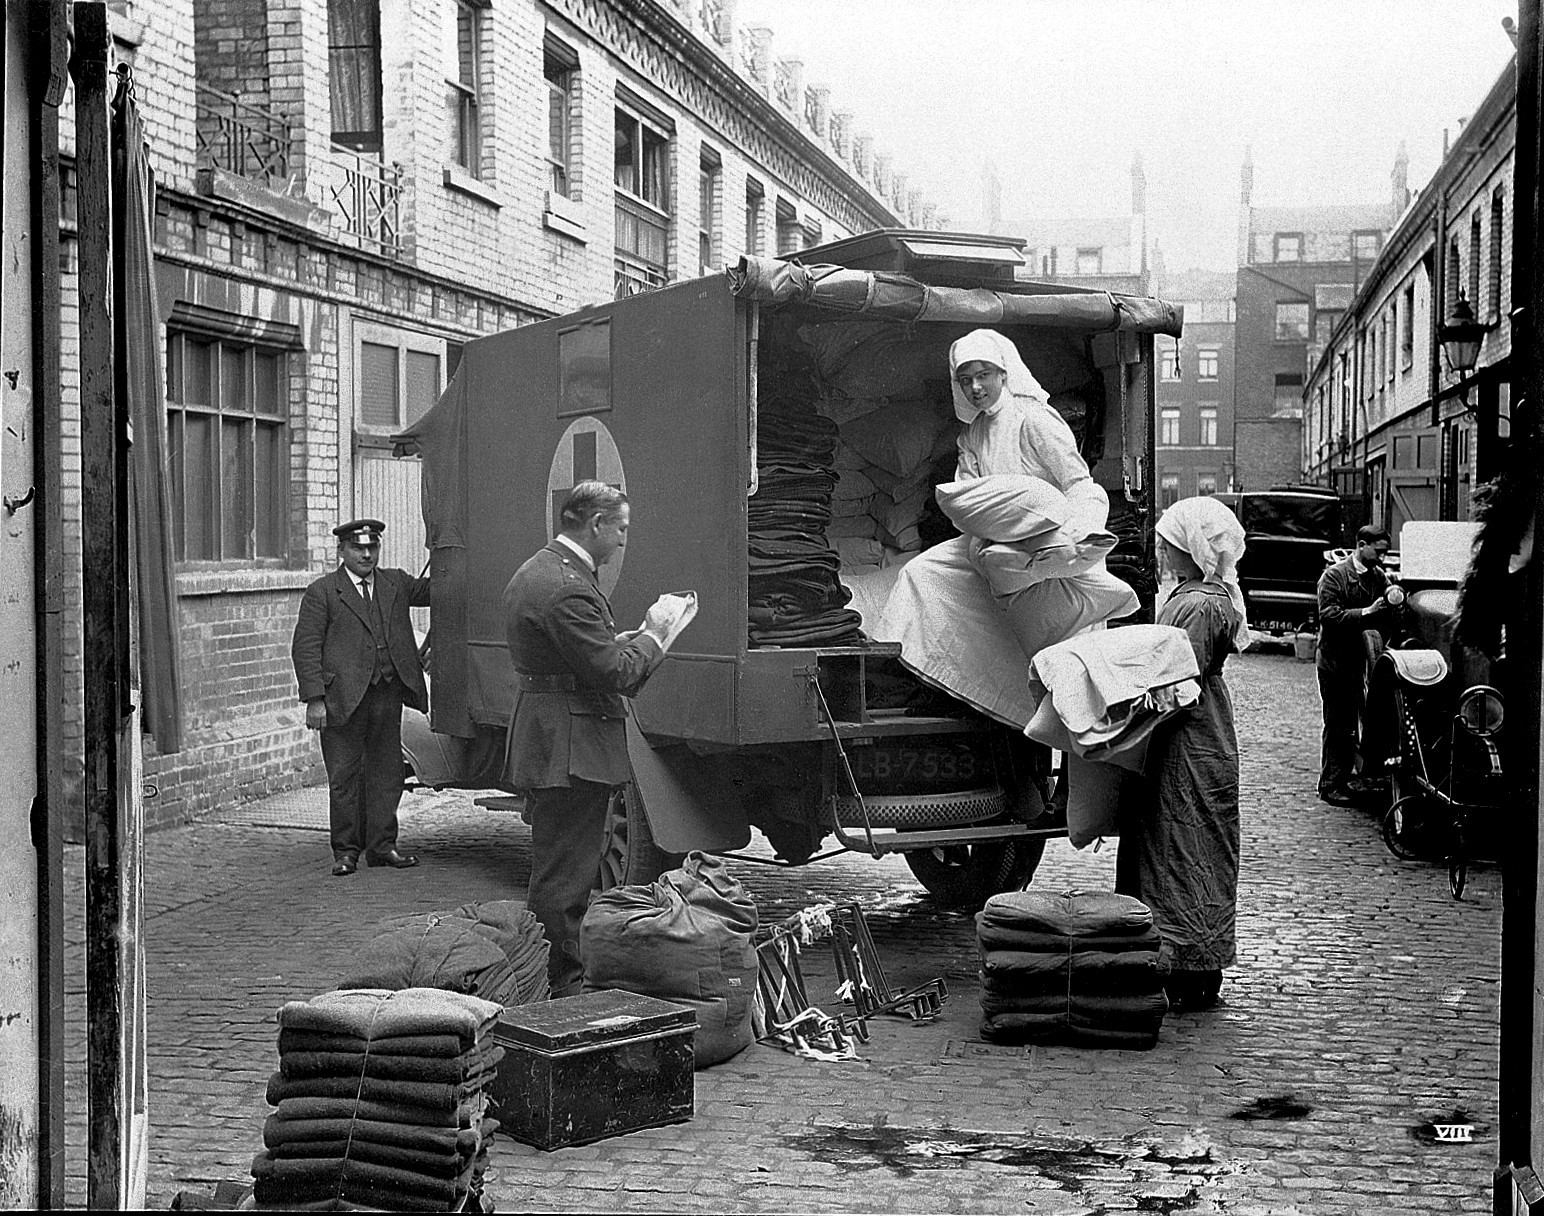 Loading up blankets into an ambulance in Gower Mews, London, in September 1918. (The Wellcome Collection)